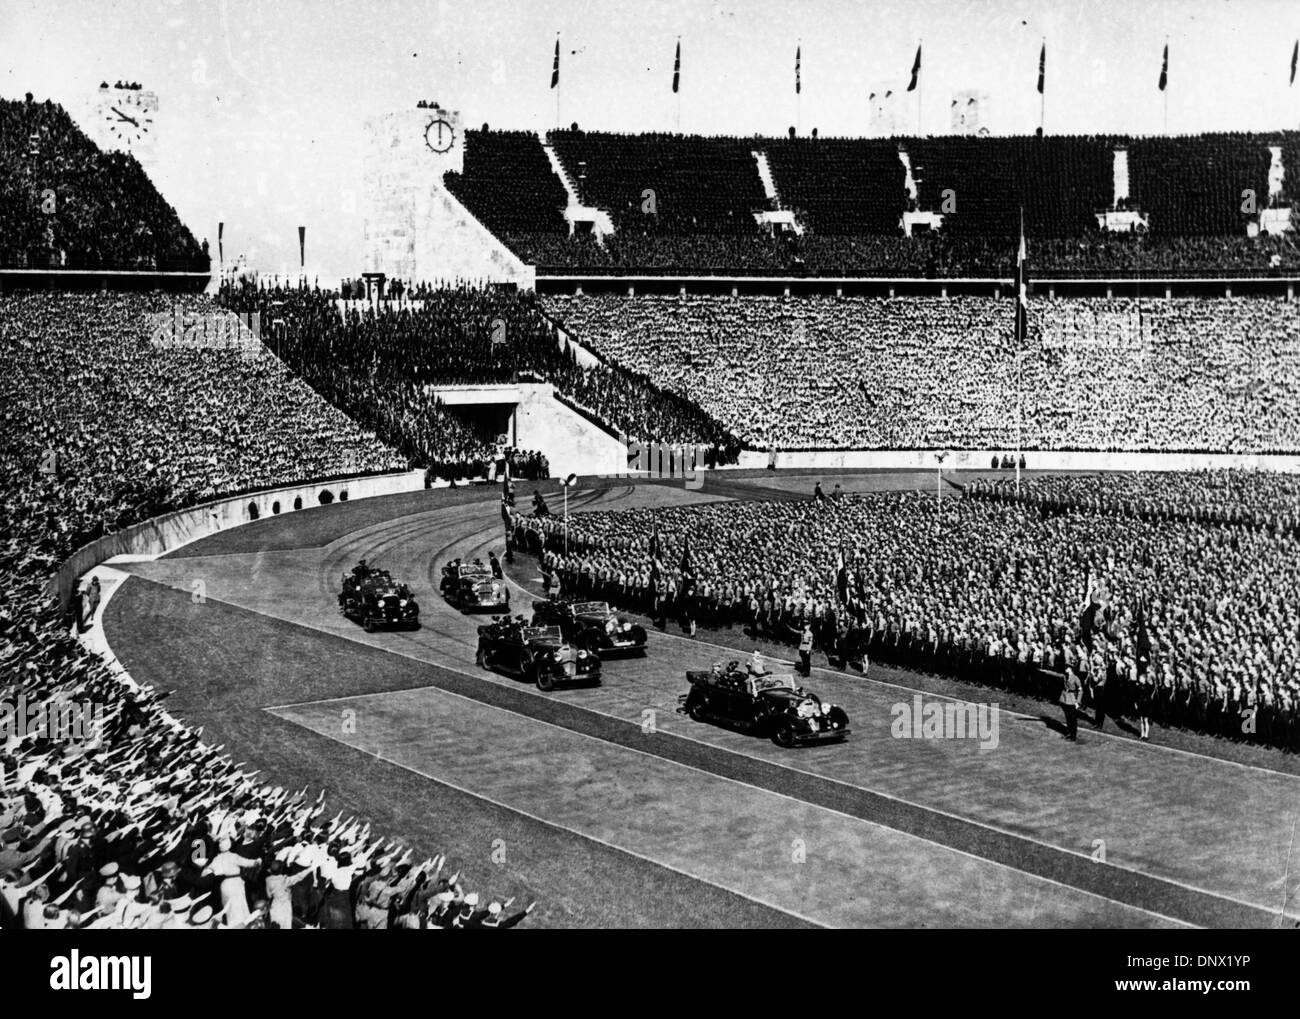 Feb. 19, 1937 - Berlin, Germany - ADOLF HITLER arrives for Olympics games. Adolf Hitler (April 20, 1889ÐApril 30, 1945) was the Fuhrer und Reichskanzler (Leader and Imperial chancellor) of Germany from 1933 to his death. He was leader of the National Socialist German Workers Party (NSDAP), better known as the Nazi Party. At the height of his power, the armies of Nazi Germany and it Stock Photo